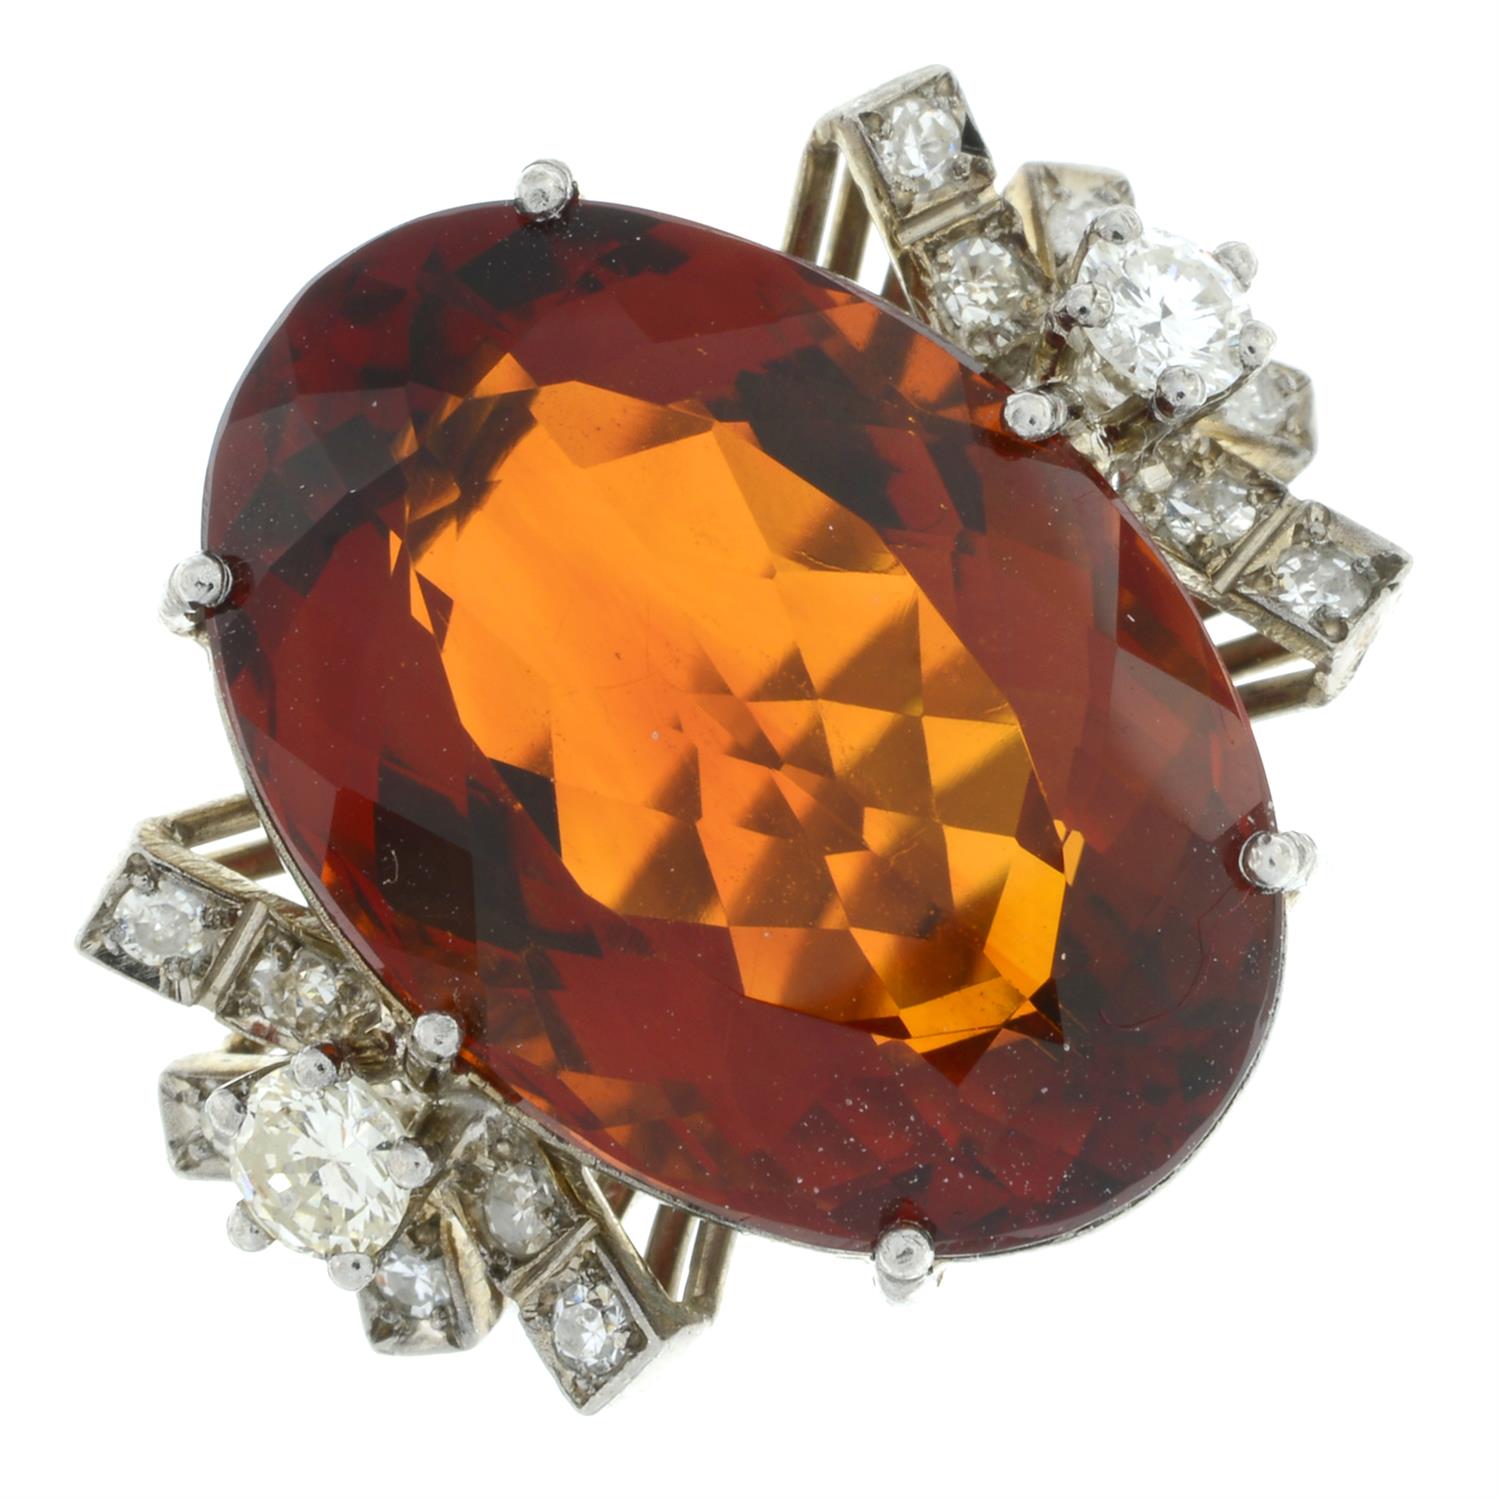 Mid 20th century gold citrine and diamond ring - Image 2 of 5